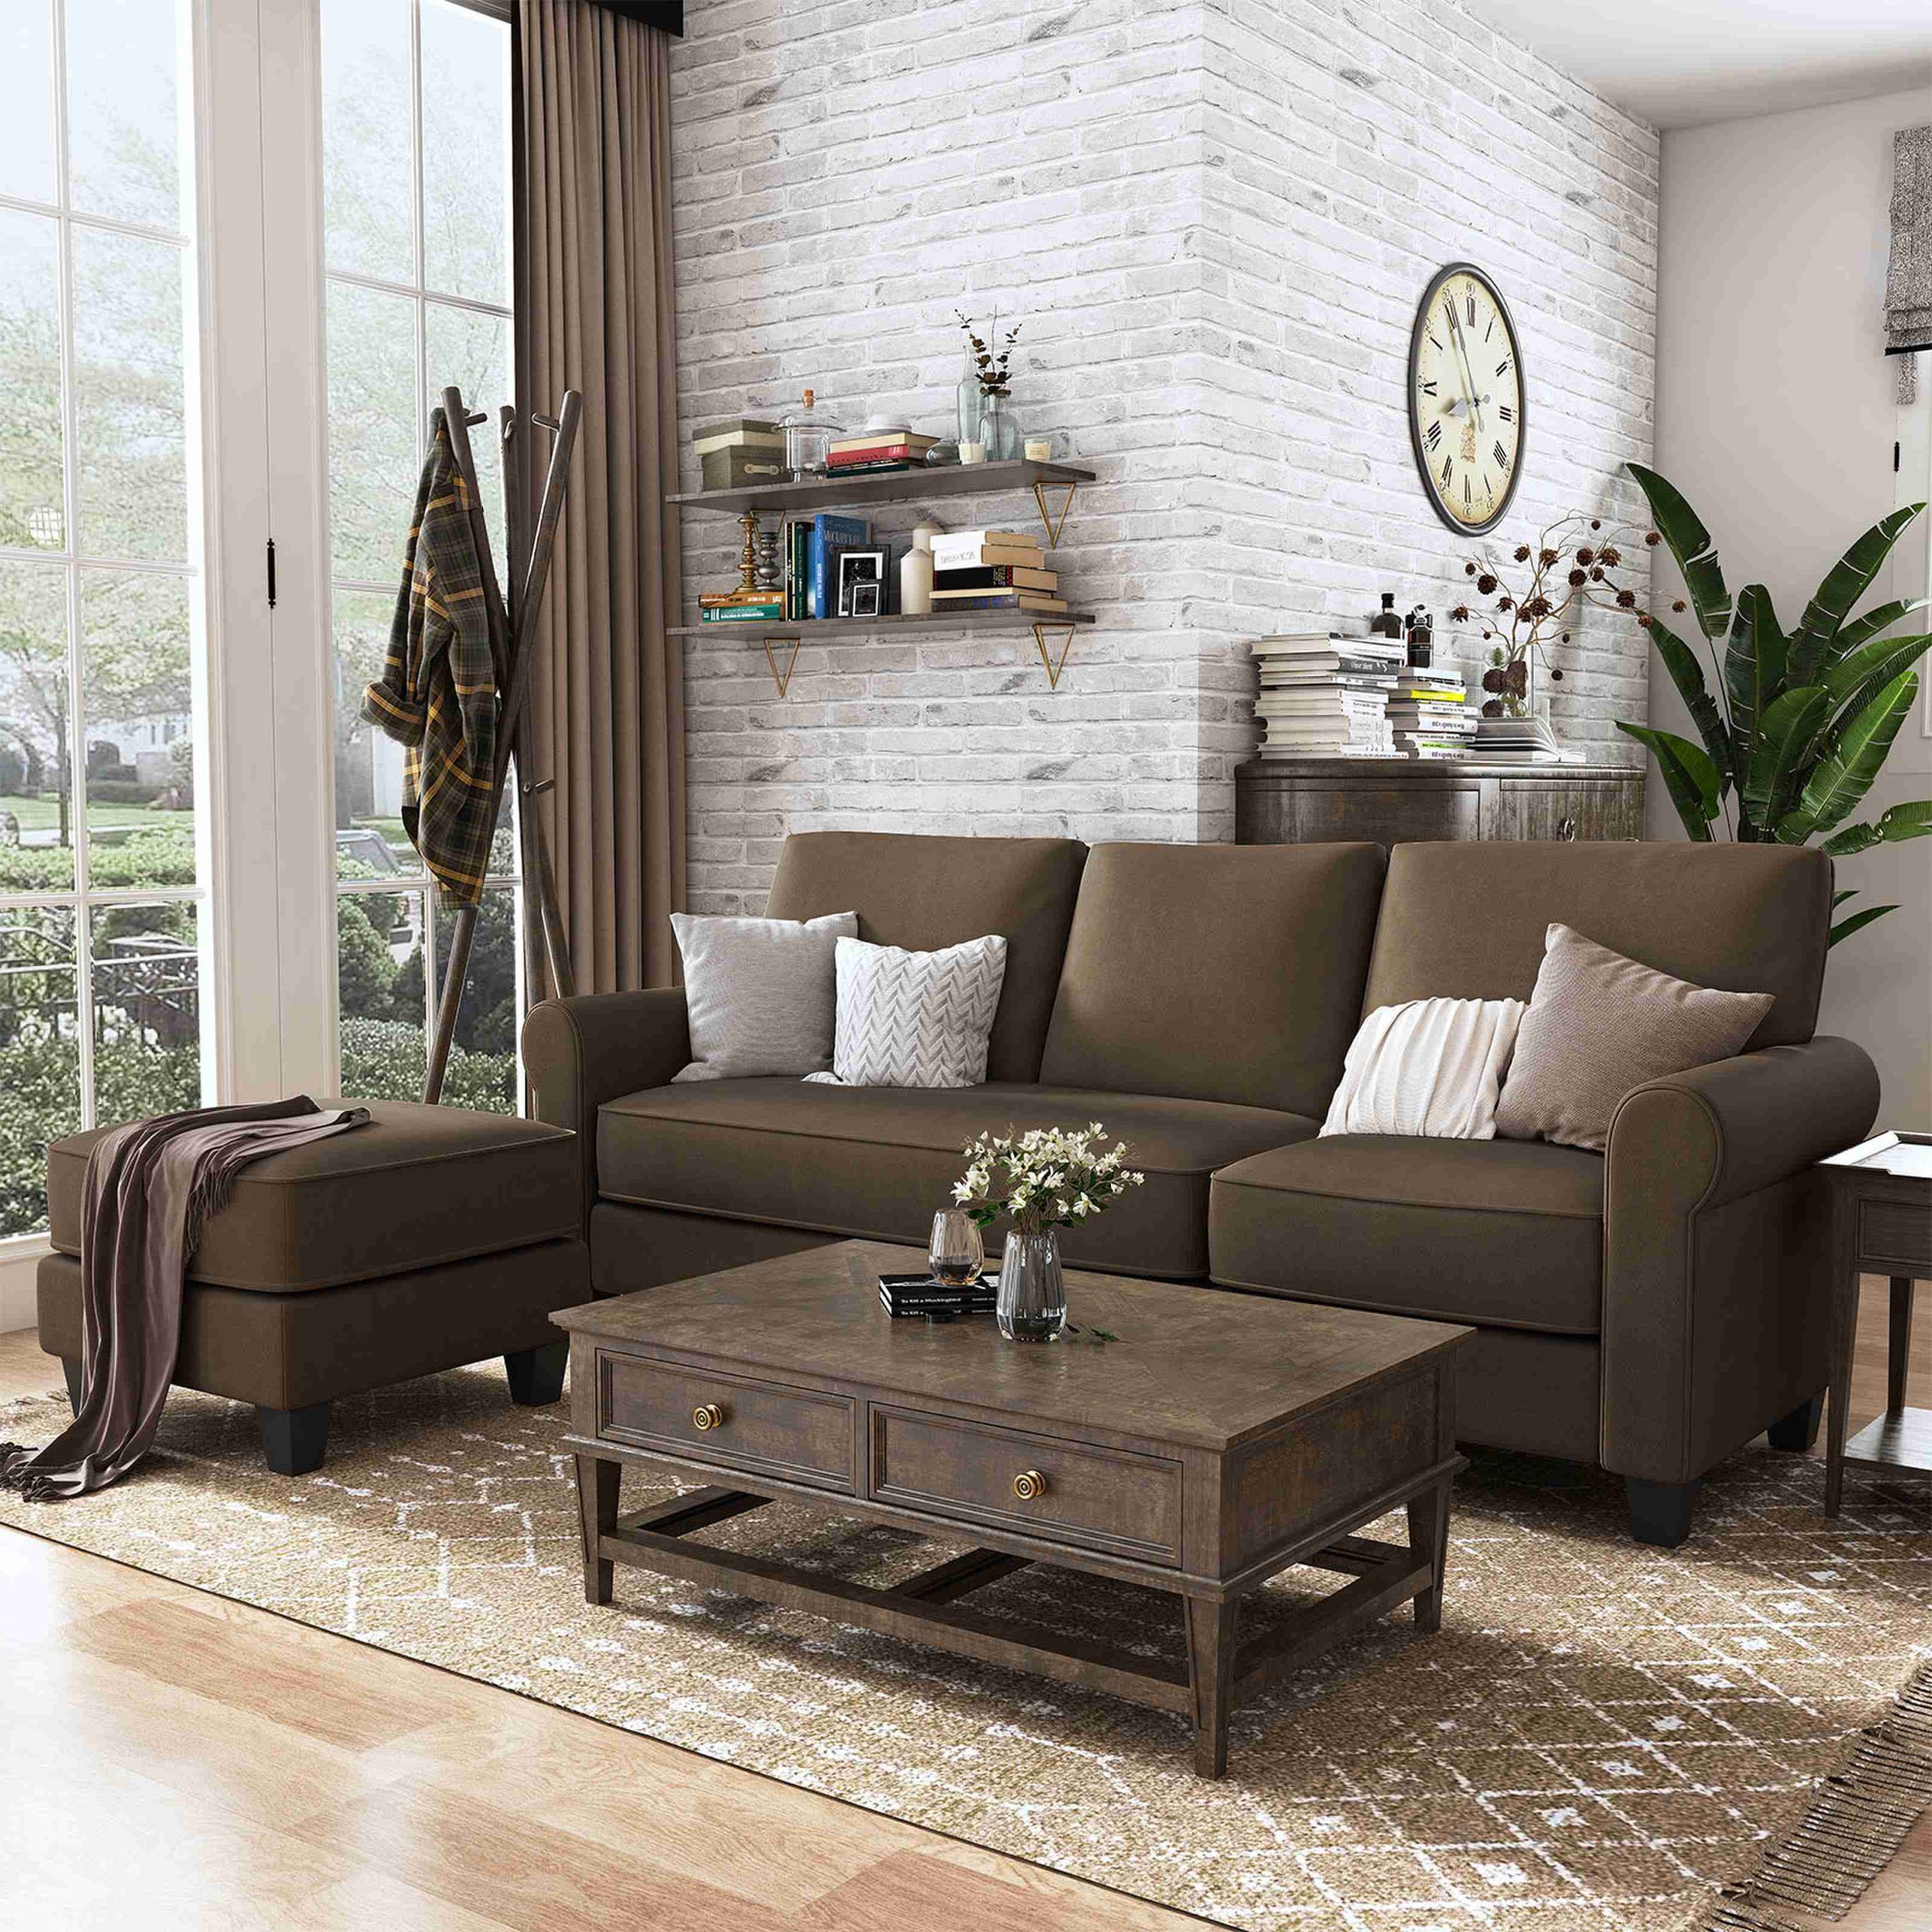 Nolany Convertible Sectional Sofa L Shaped Couch 3 Seat Sofa With Chaise, Chocolate  Brown – Walmart Pertaining To Sofas In Chocolate Brown (View 3 of 15)